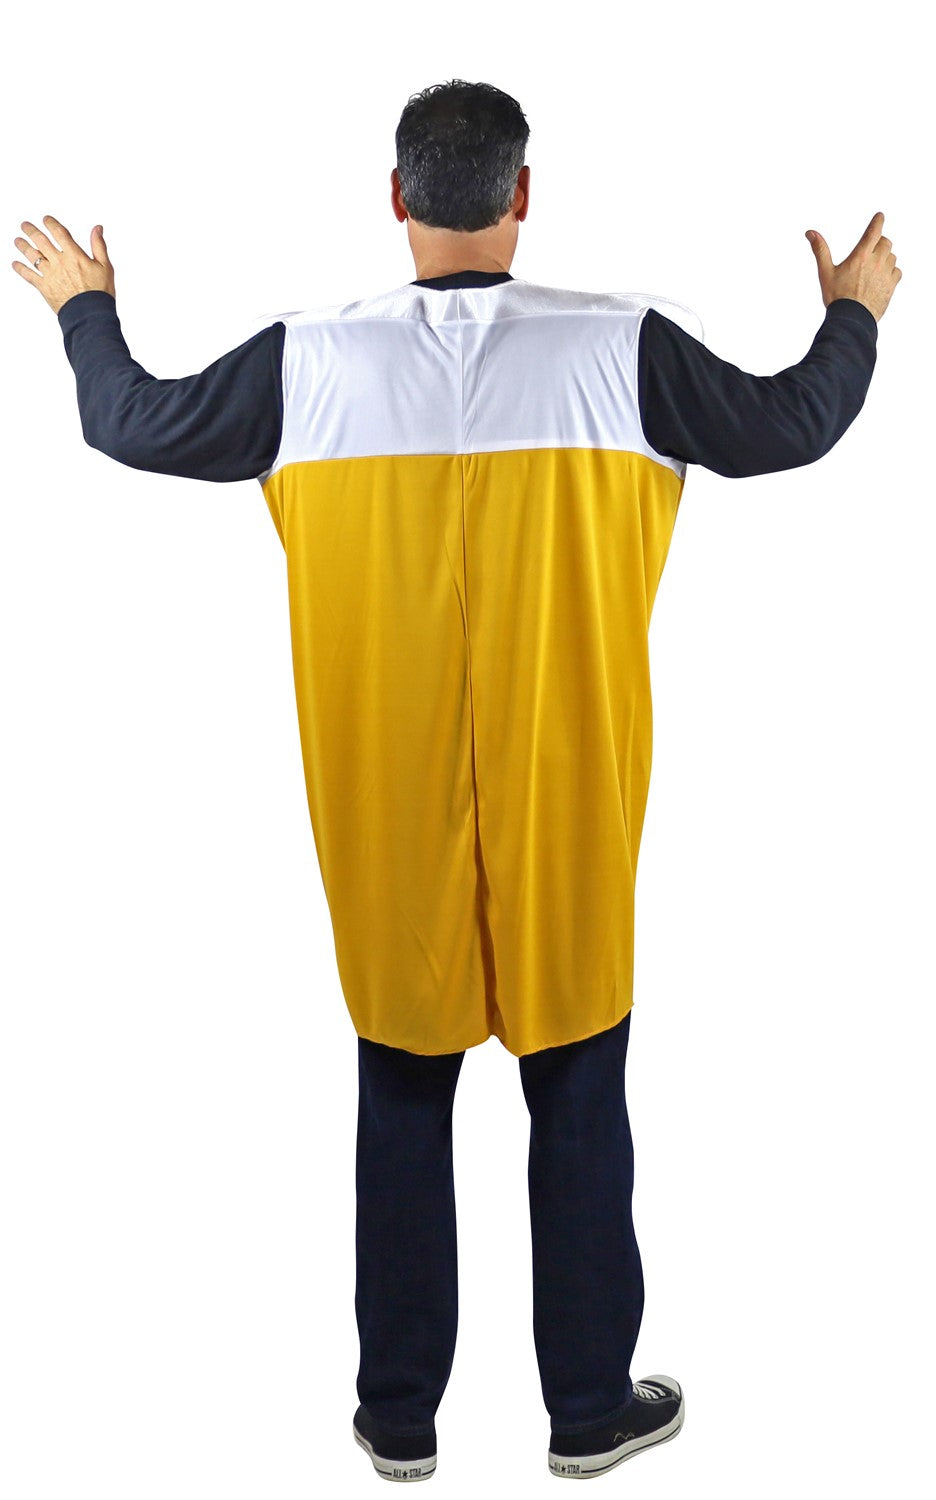 Beer Pint Costume, Adult One Size